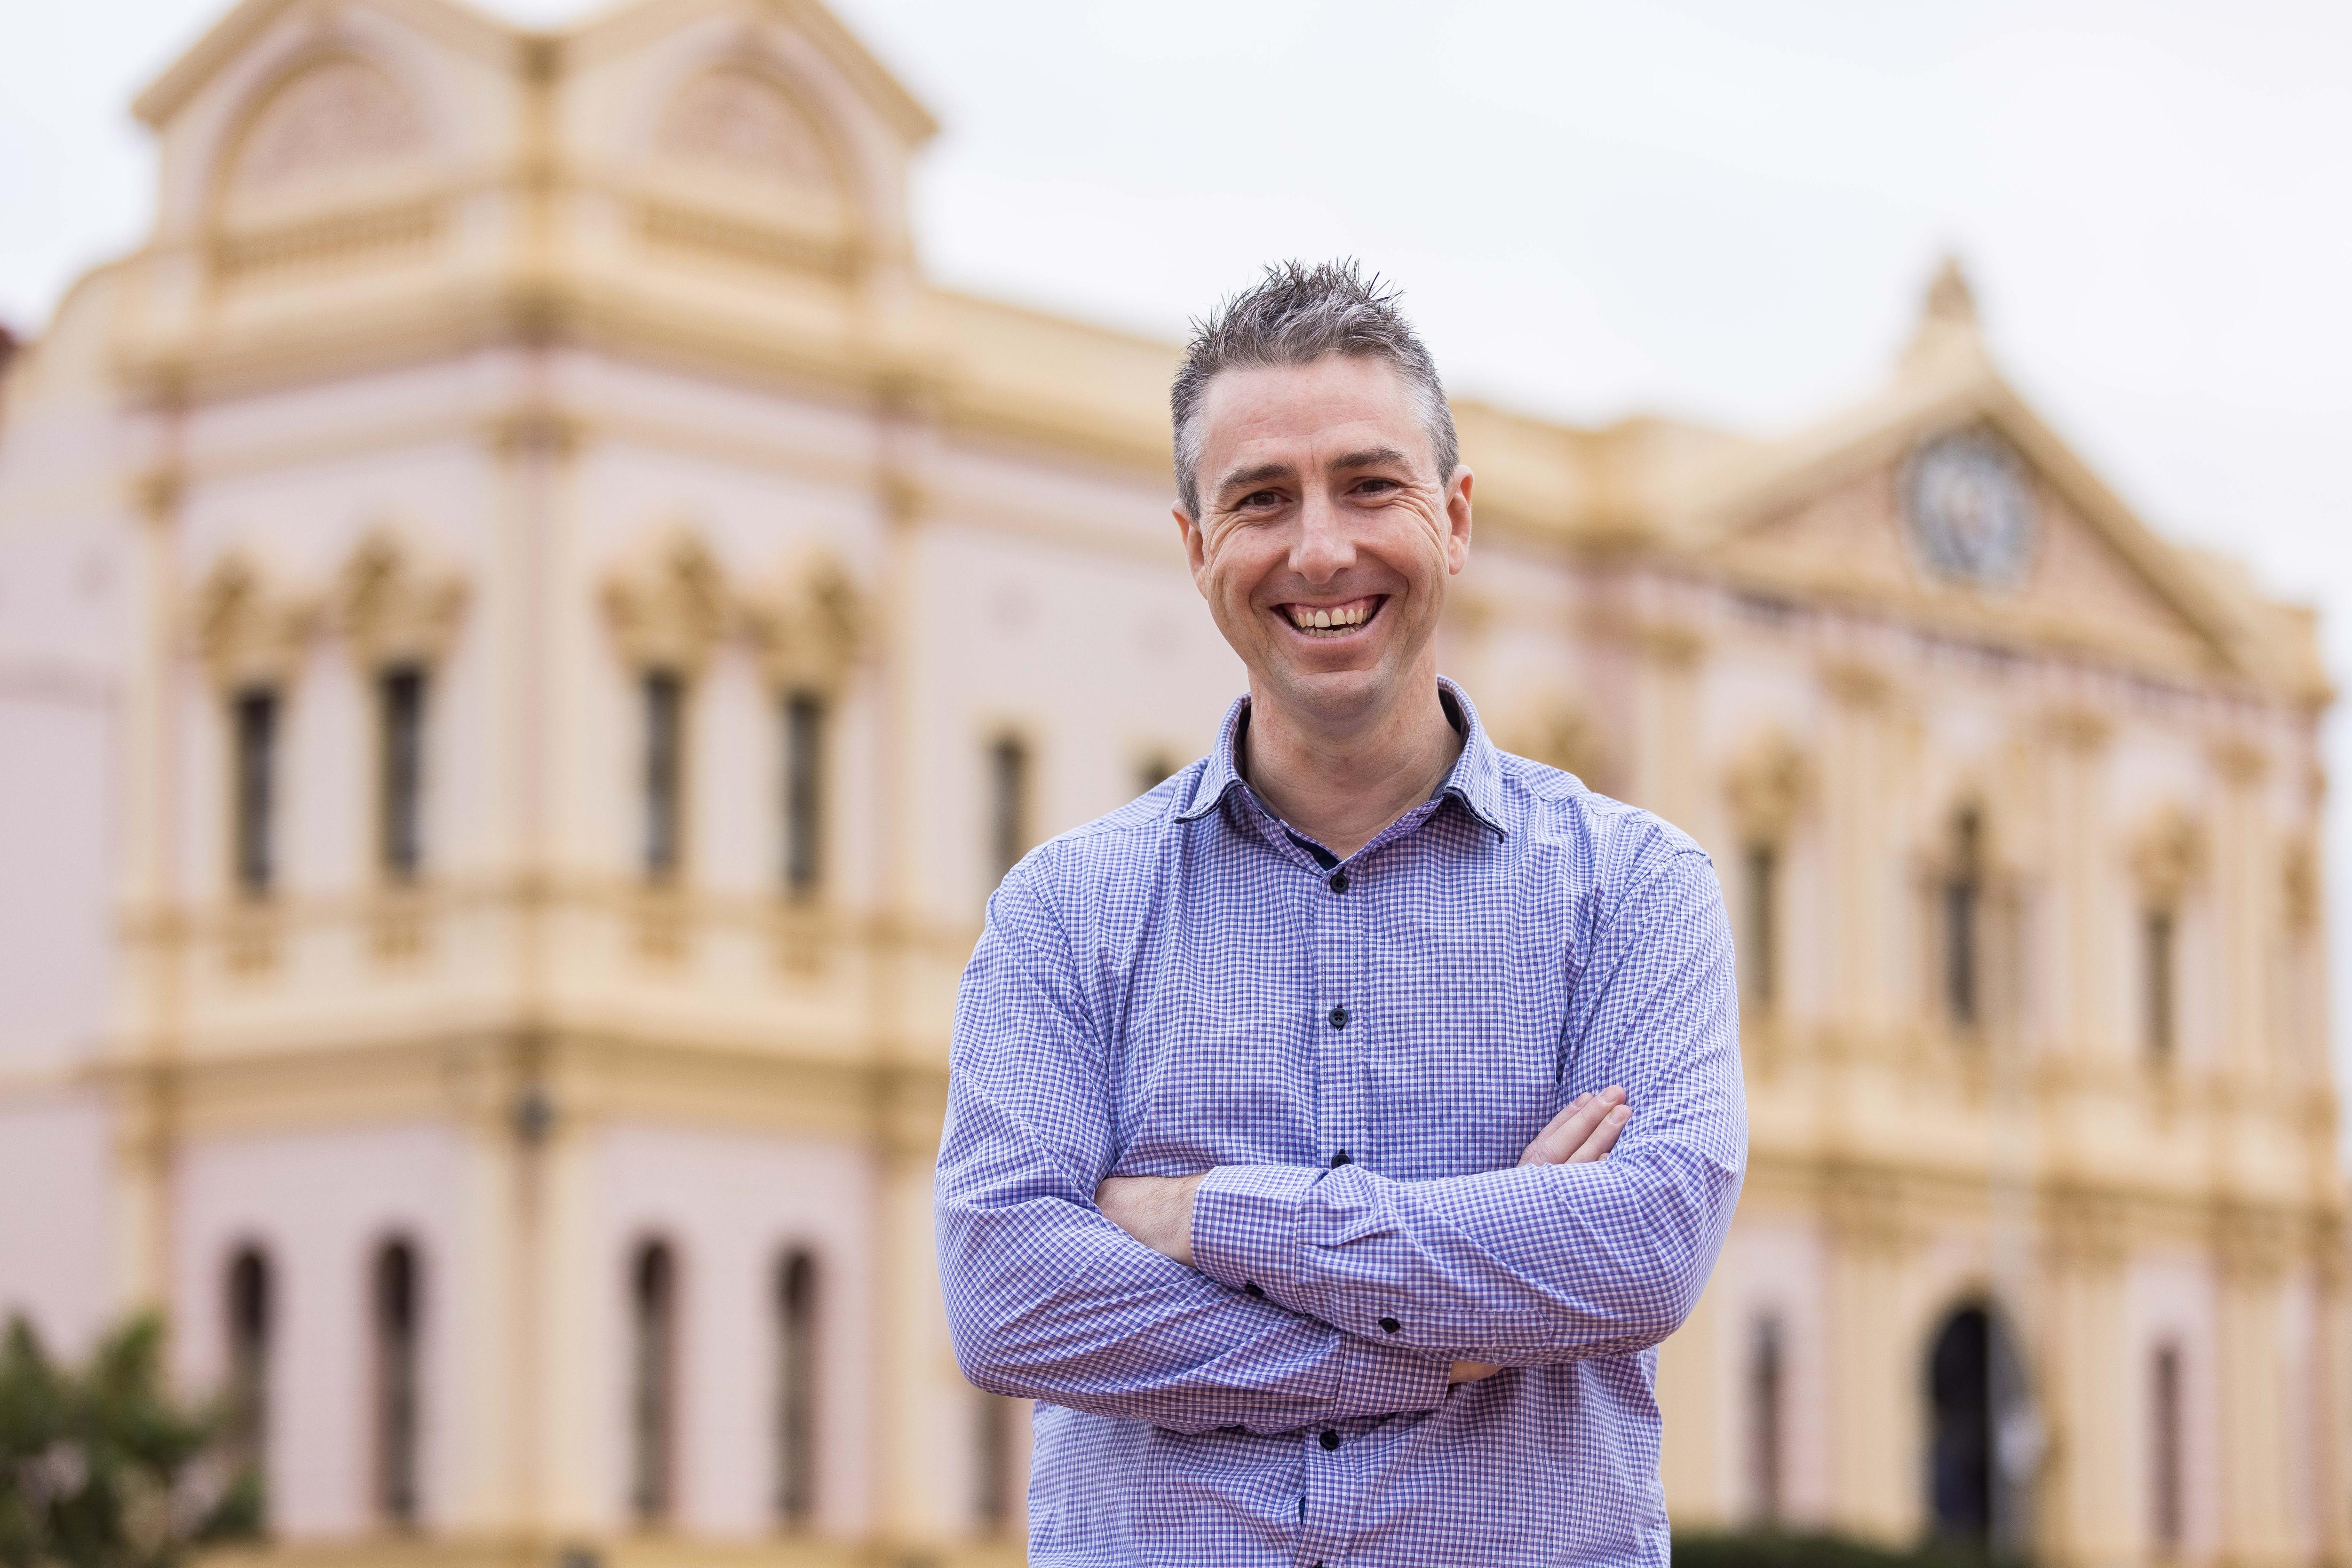 A man in a business shirt with arms crossed in front of a heritage building.  